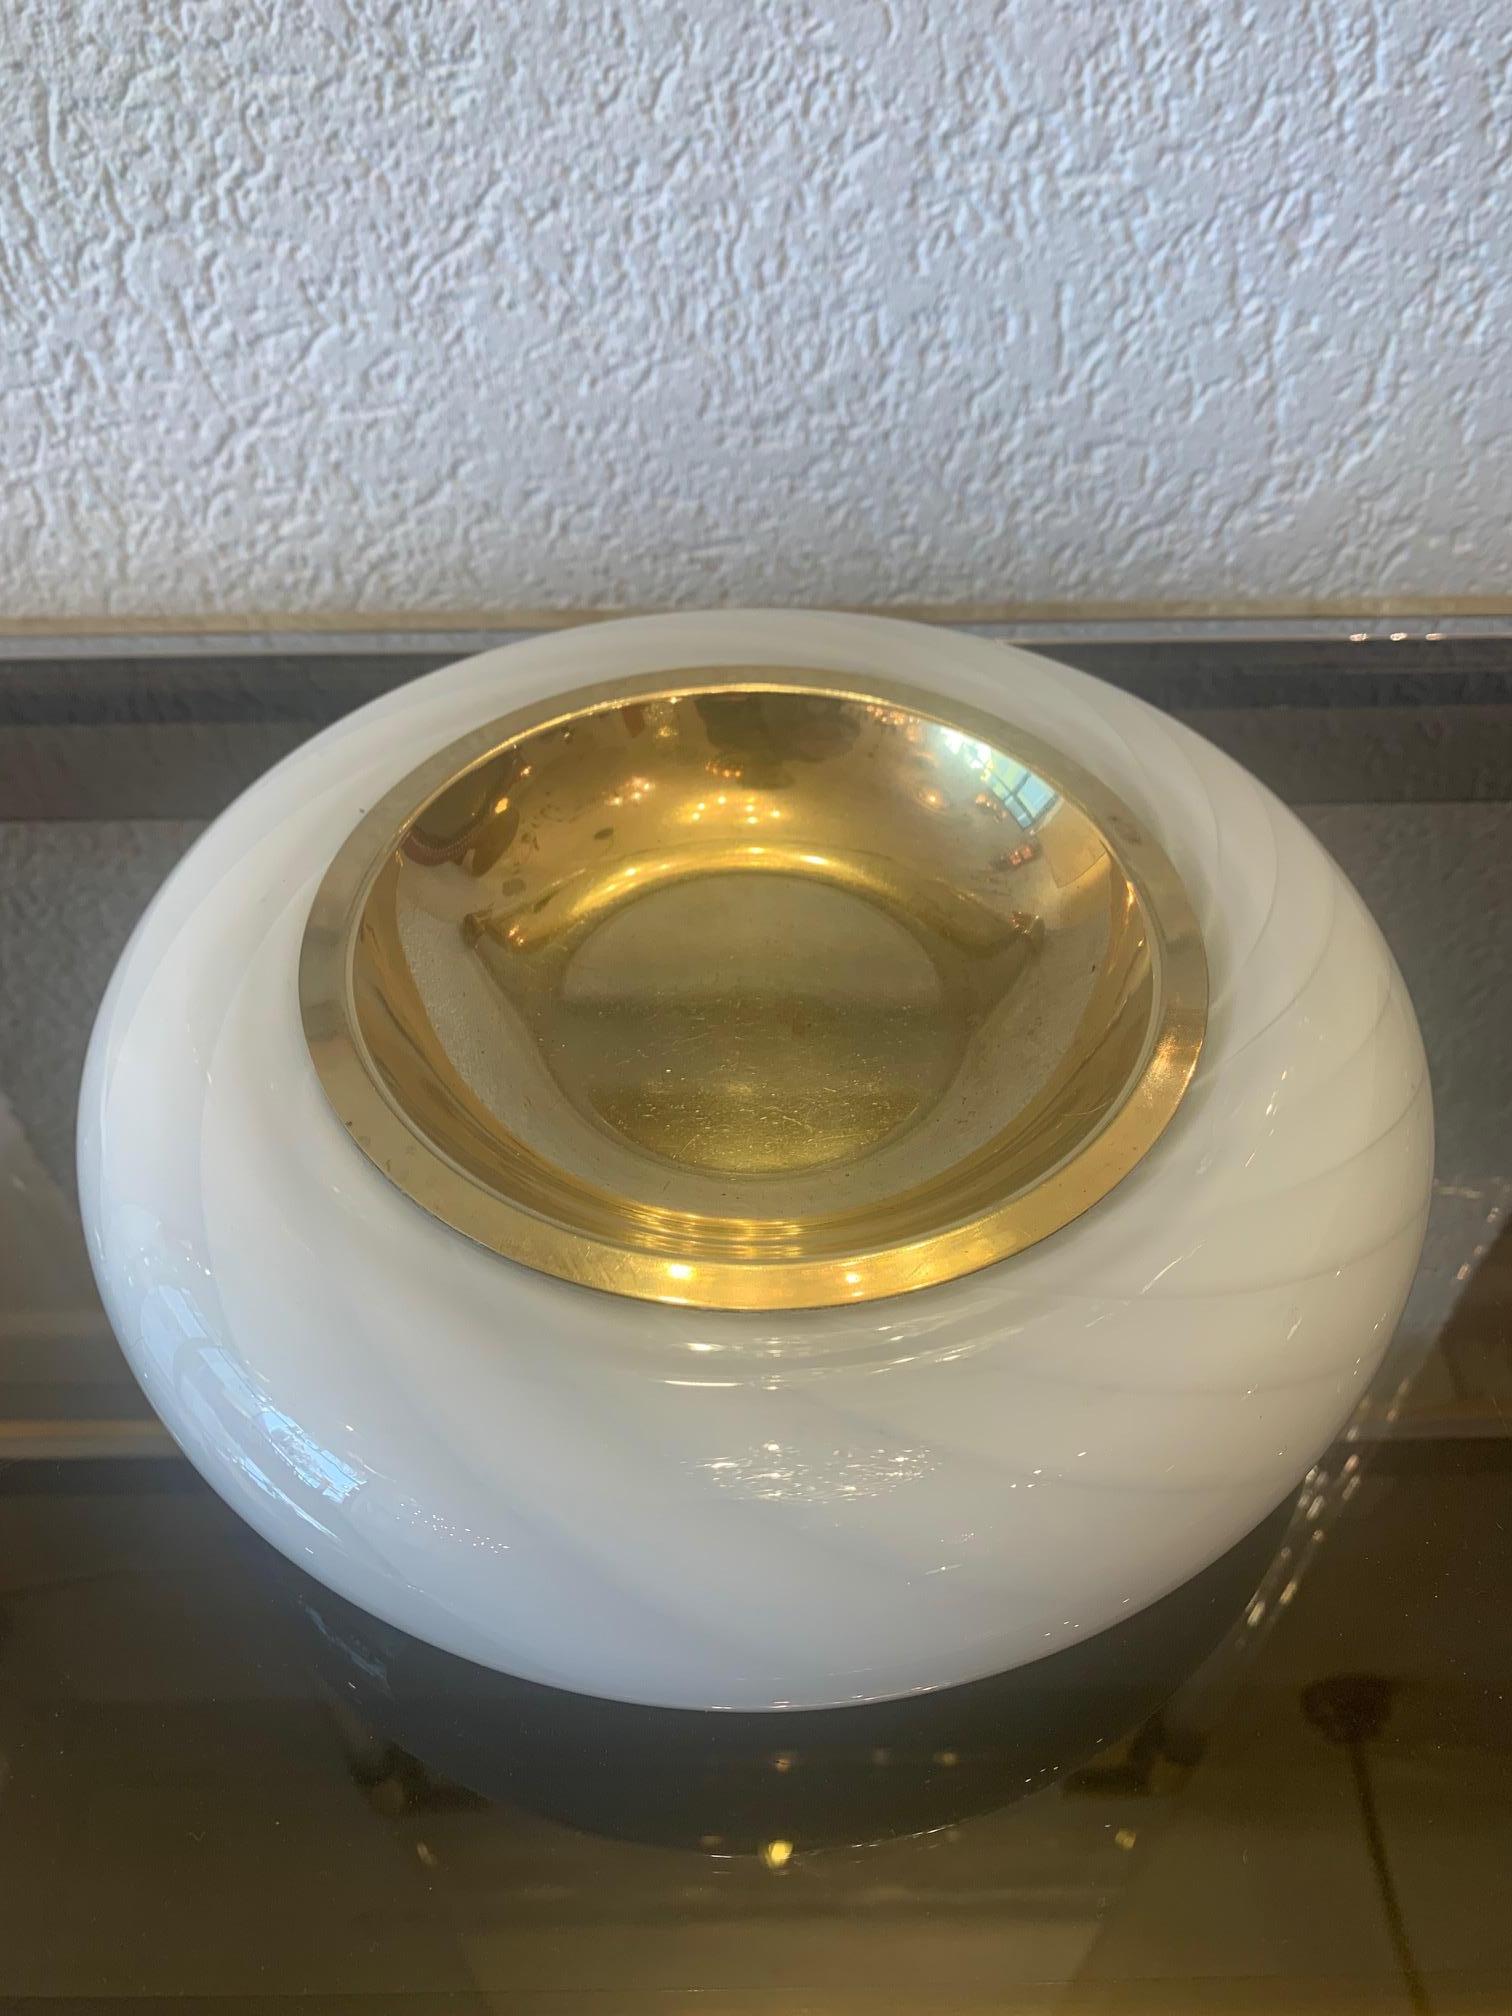 Murano glass and brass ashtray or pocket emptier by Tommaso Barbi, Italy ca. 1970s
Measures: 24 cm diameter, 7 cm high
Very good condition.